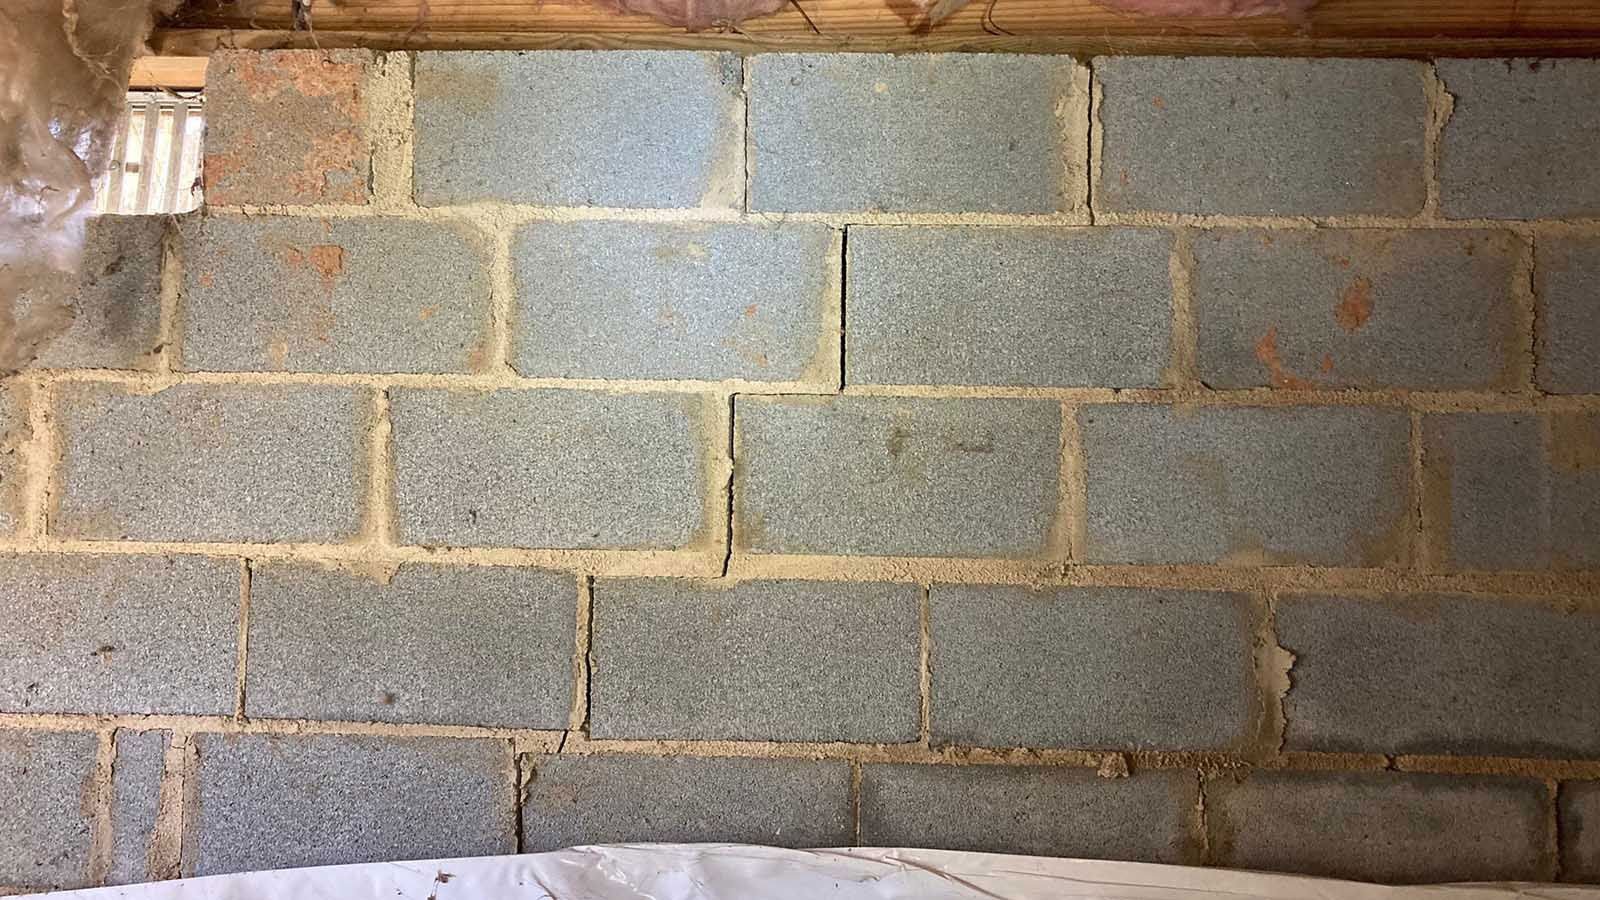 Stairstep cracks in foundation wall